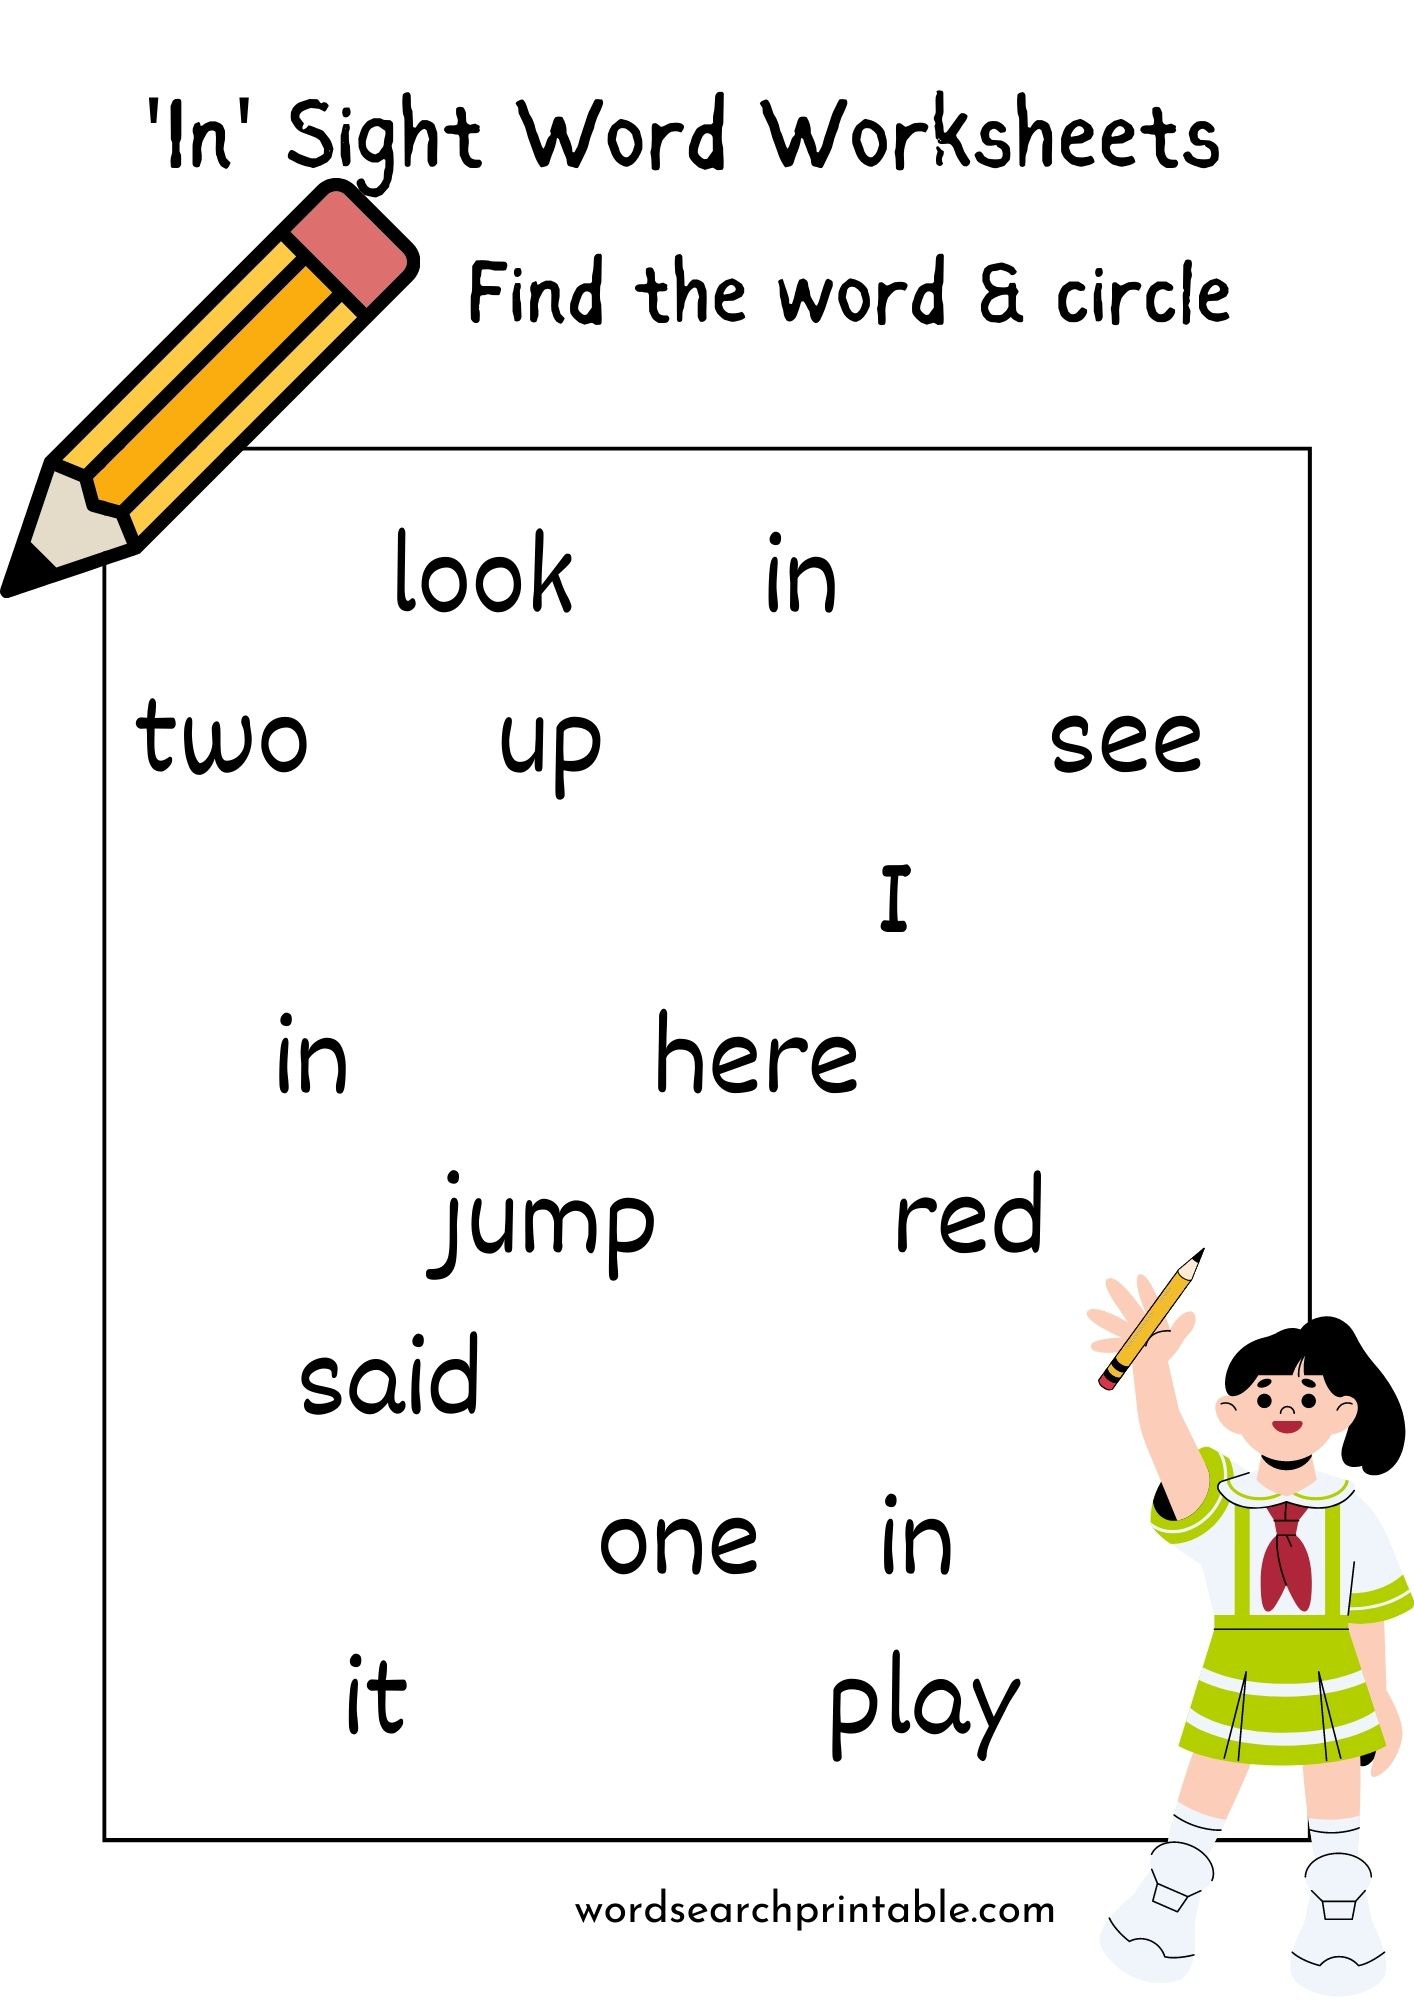 Find the sight word In and circle it